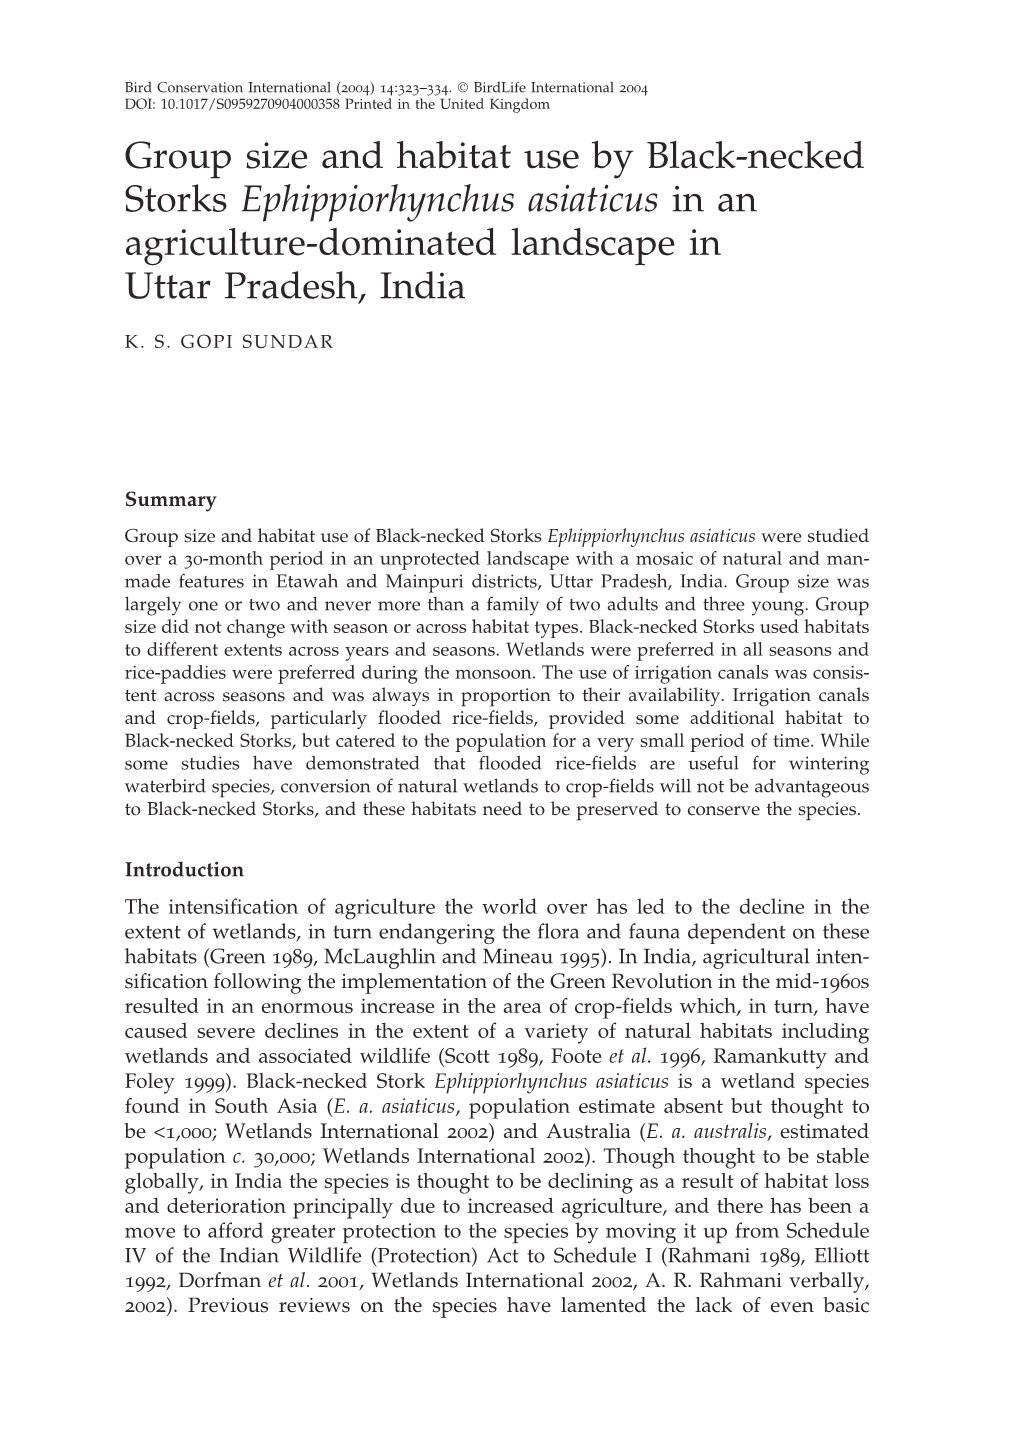 Group Size and Habitat Use by Black-Necked Storks Ephippiorhynchus Asiaticus in an Agriculture-Dominated Landscape in Uttar Pradesh, India